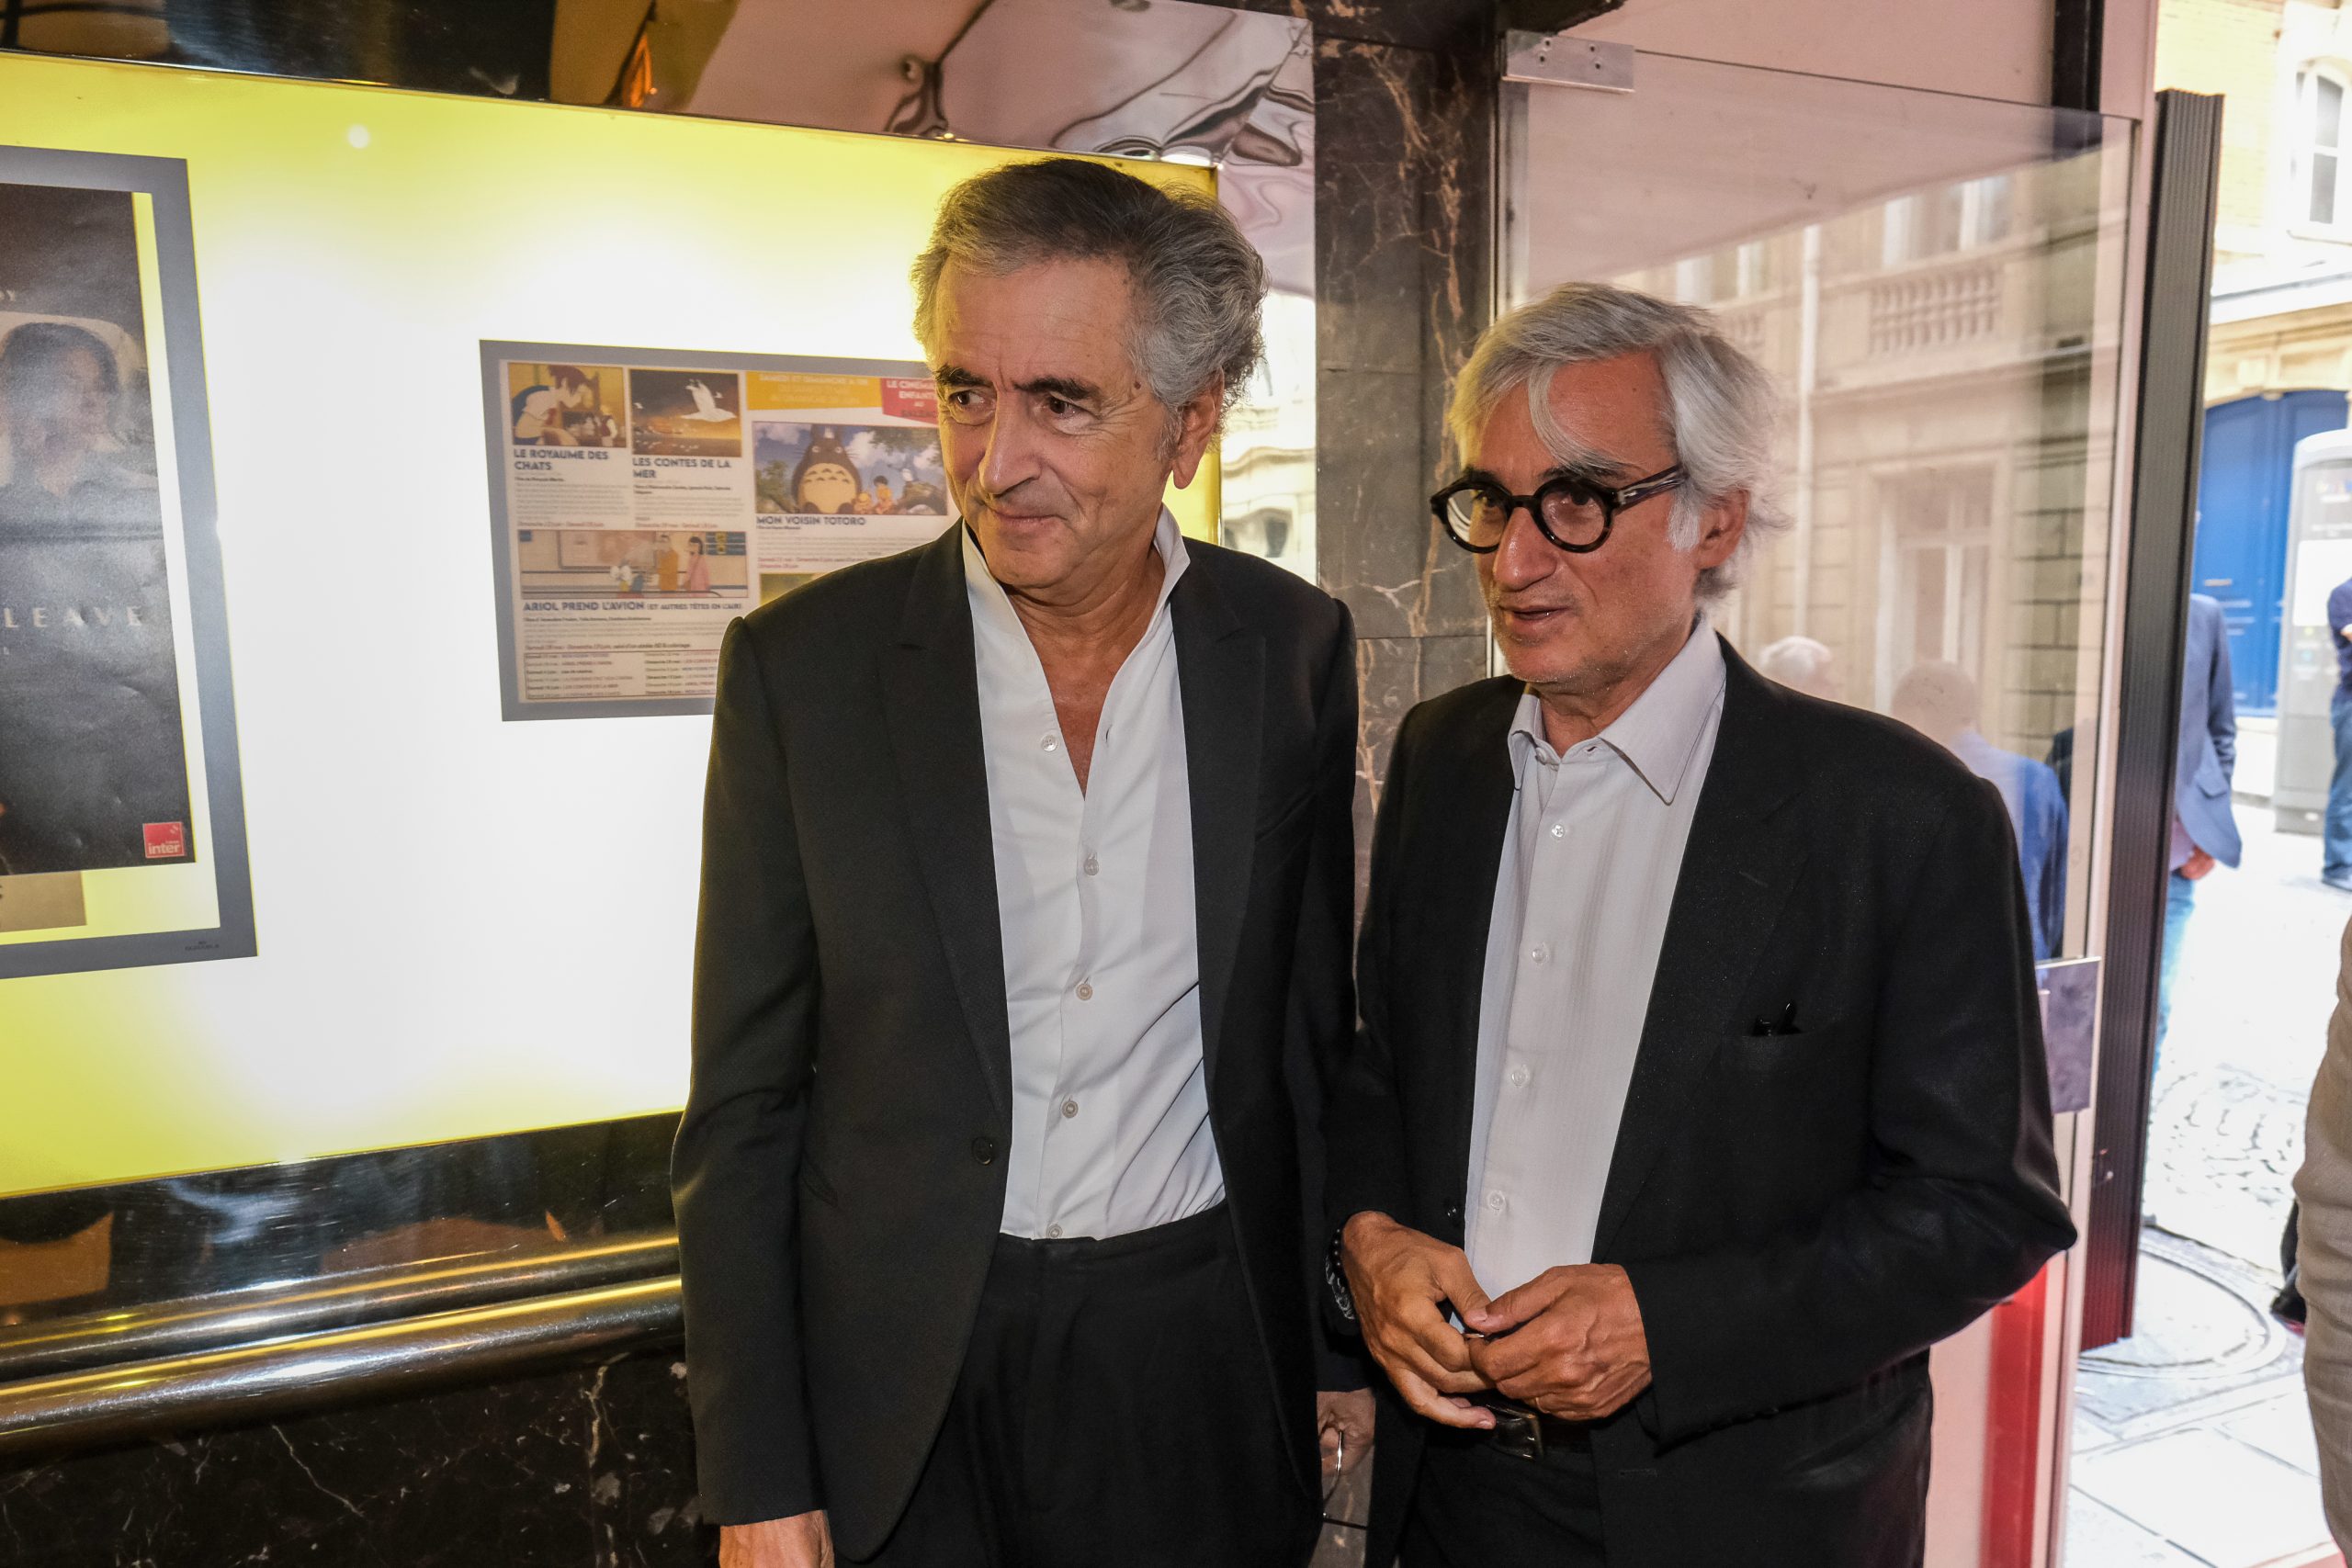 Bernard-Henri Lévy and Maurice Szafran, during the preview of BHL's film "Why Ukraine", at the Cinema Le Balzac in Paris